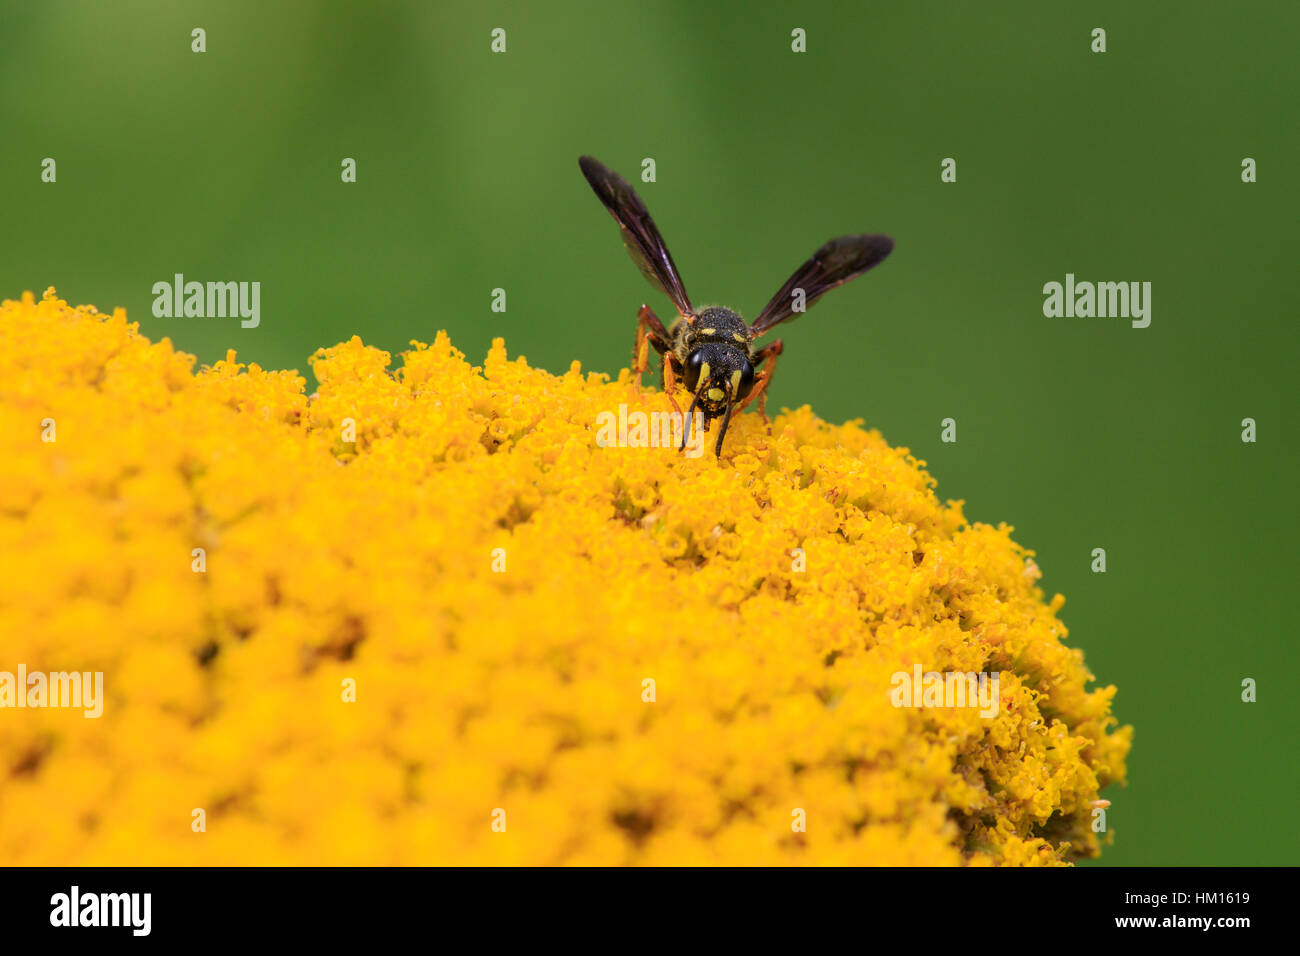 Weevil wasp (Cerceris sp.) on yellow flower. Stock Photo